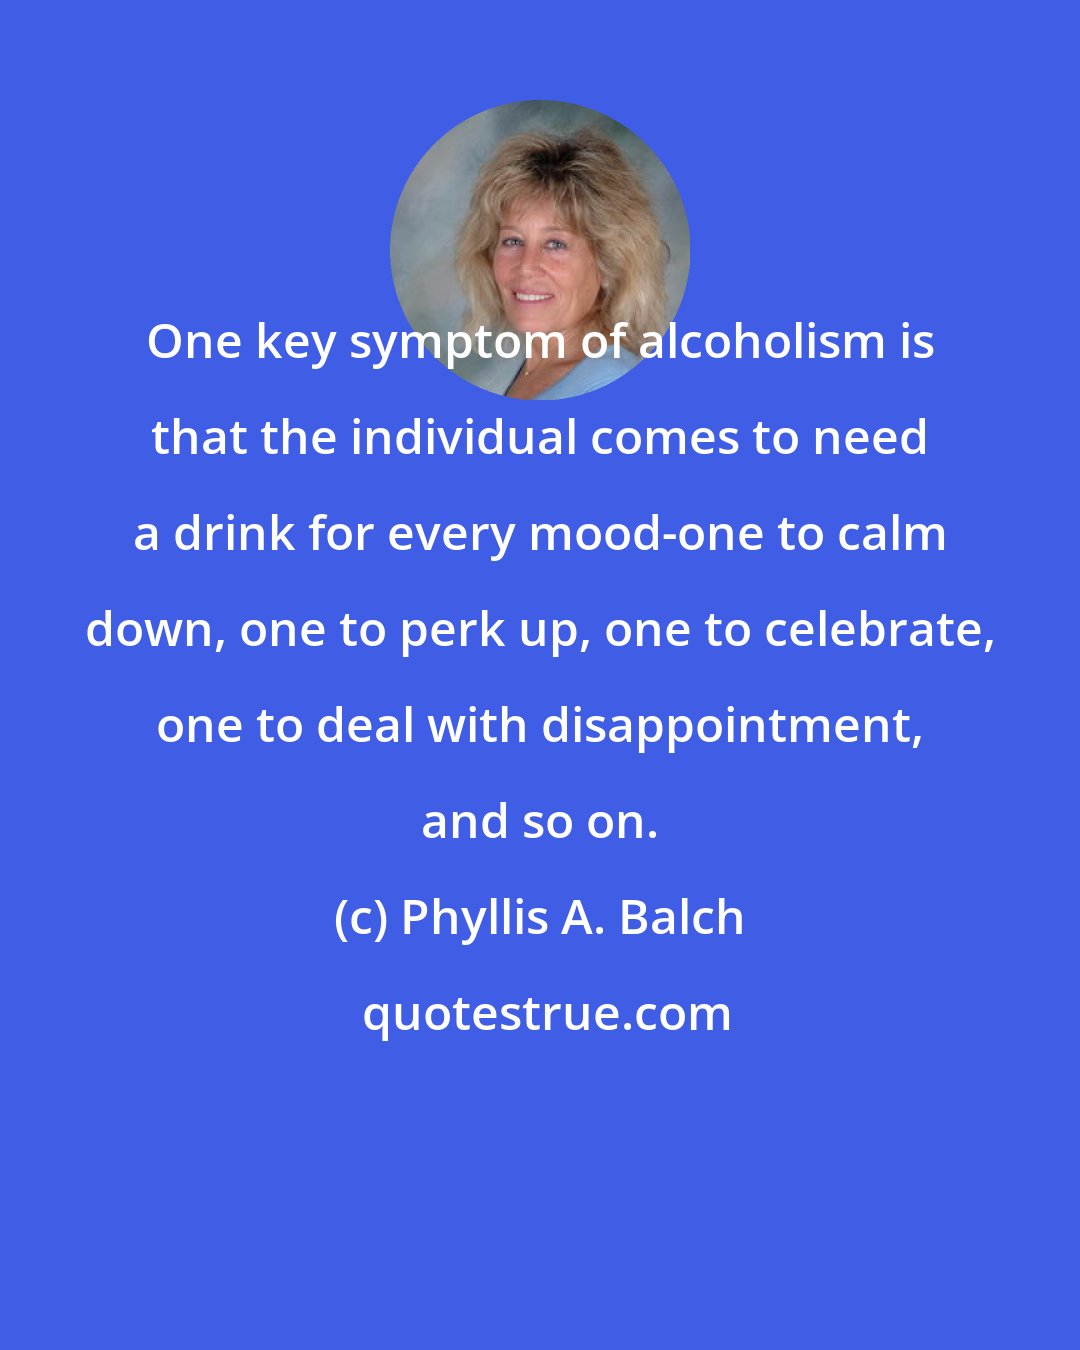 Phyllis A. Balch: One key symptom of alcoholism is that the individual comes to need a drink for every mood-one to calm down, one to perk up, one to celebrate, one to deal with disappointment, and so on.